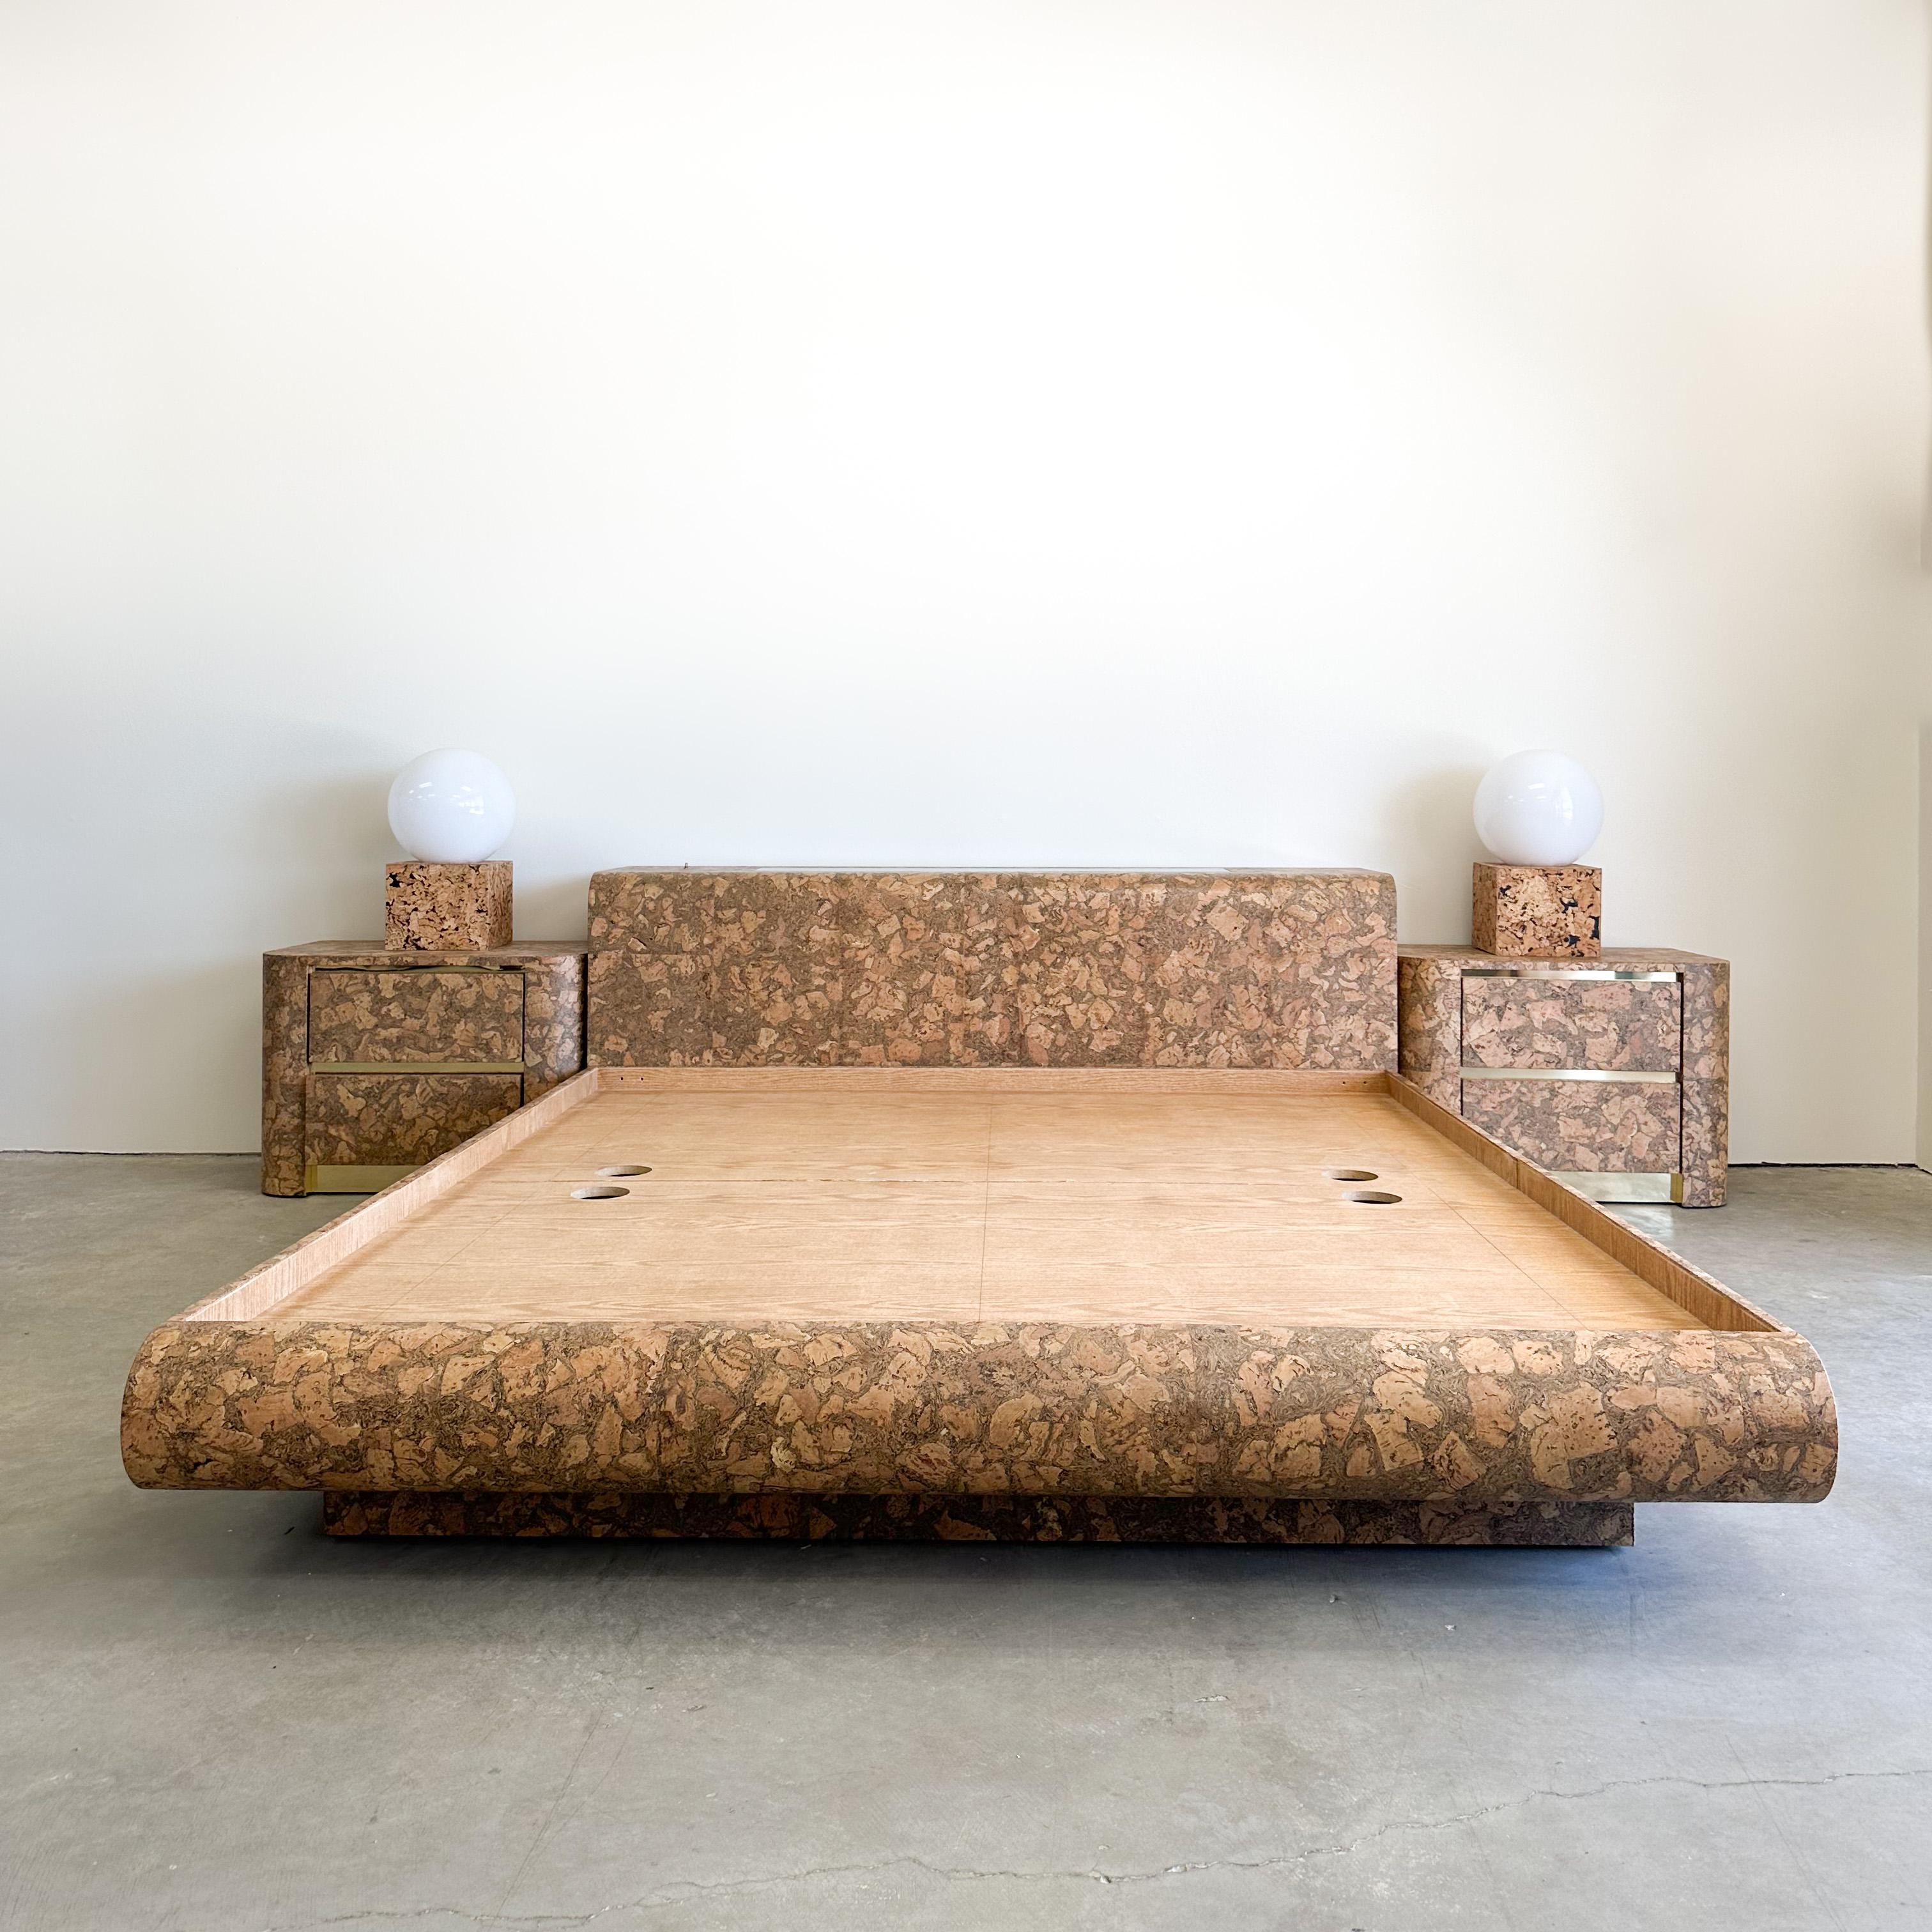 Vintage California King Cork Platform Bed & Headboard.  

Very rare cork vintage platform bed. The headboard has a black glass top inlay. The front edge has a bullnose detail. 
Very special.  

Color: Natural Cork 

Measurements: 
Length: 106 1/4